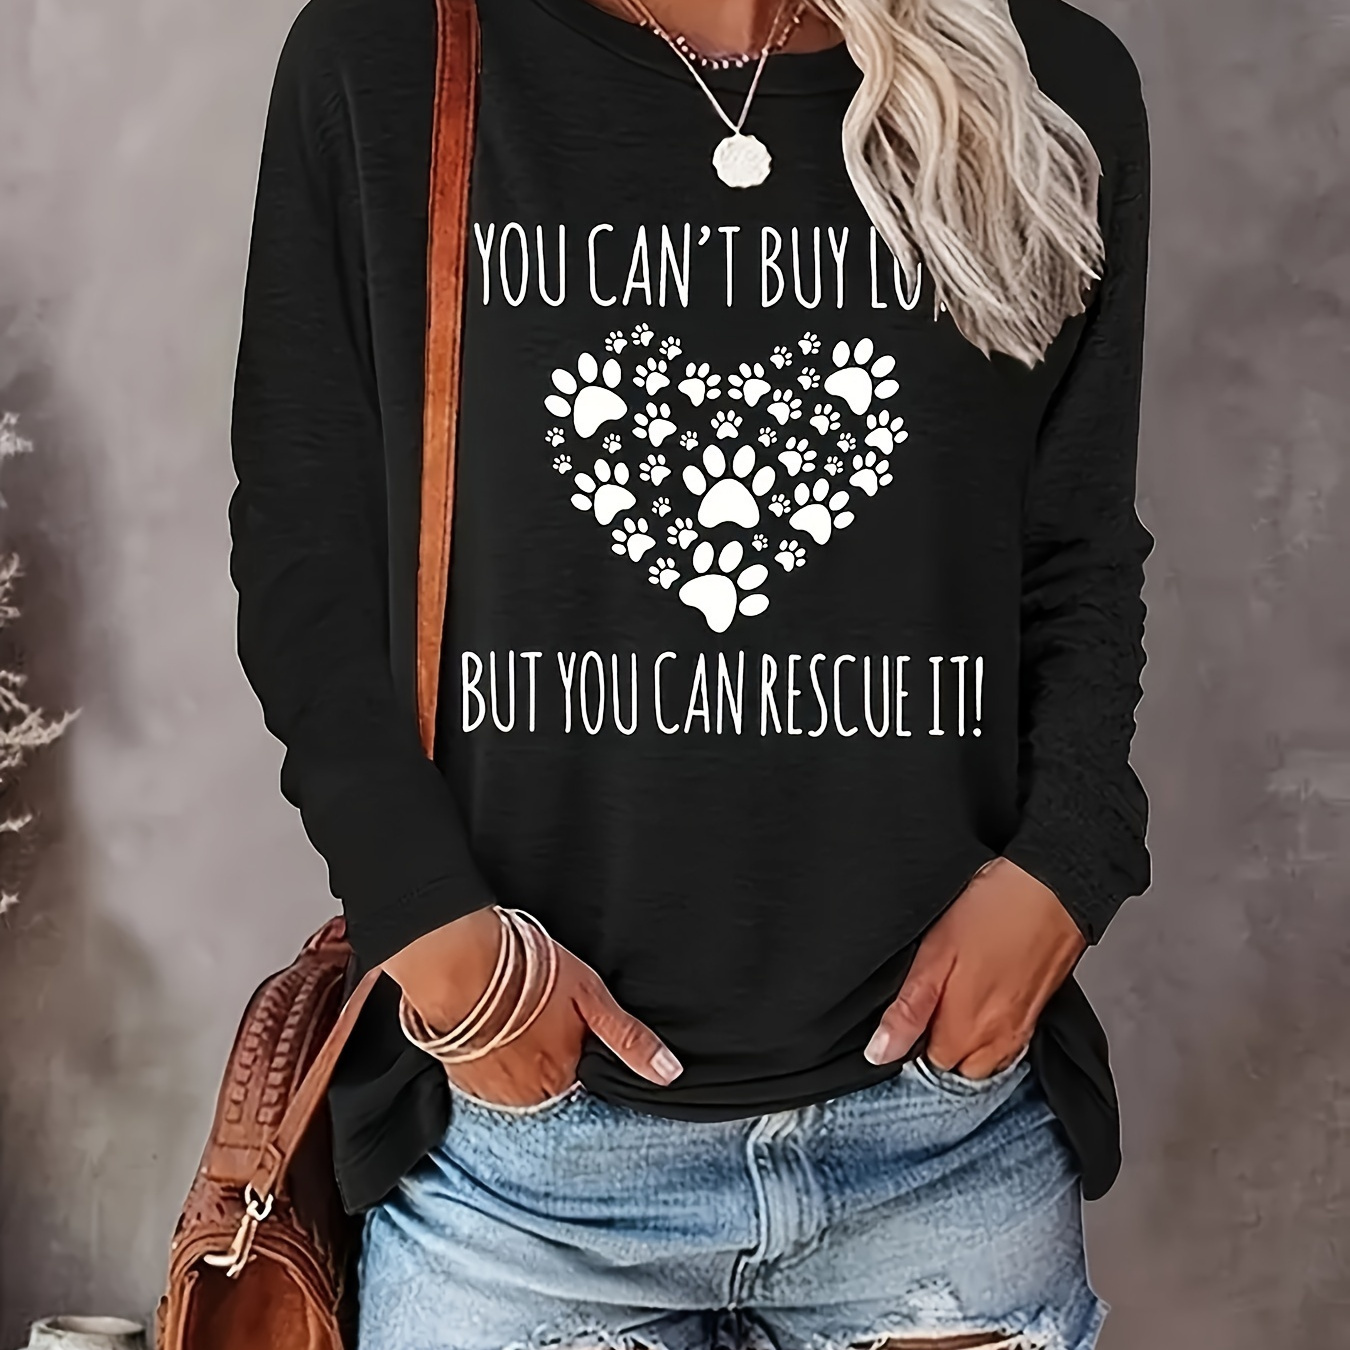 

Paw & Letter Print Crew Neck T-shirt, Casual Long Sleeve T-shirt For Spring & Fall, Women's Clothing